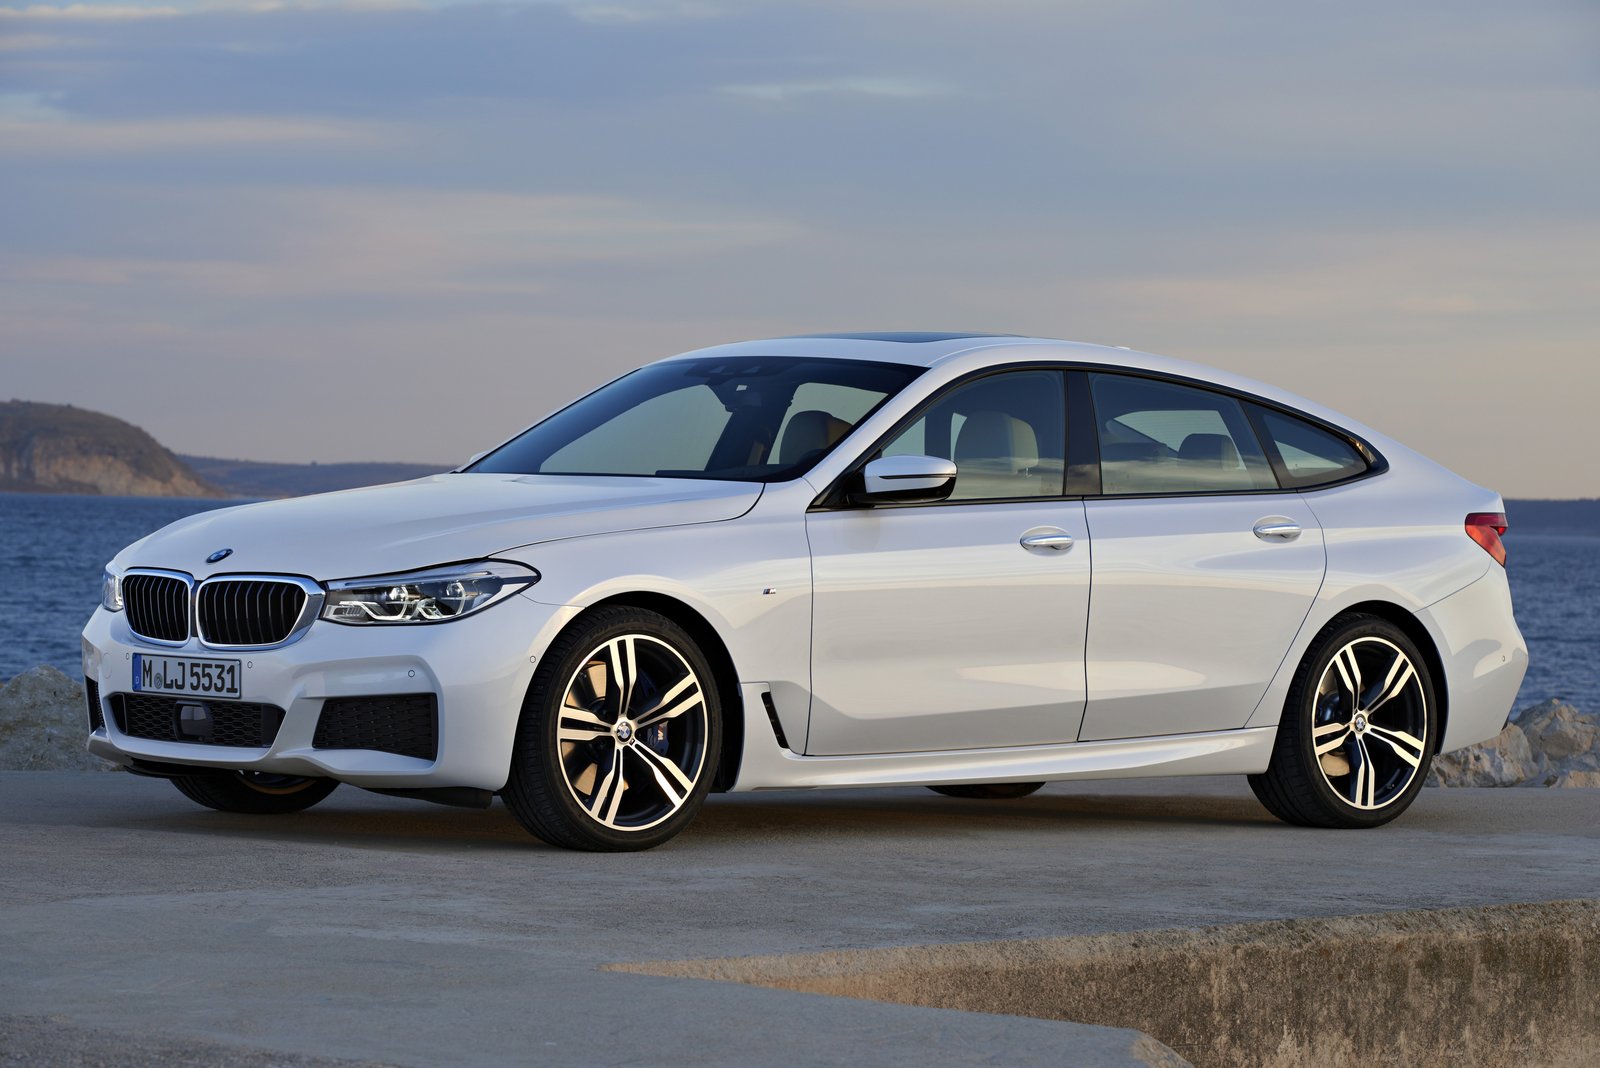 2018 Bmw 6 Series Gt Launched In India Price Engine